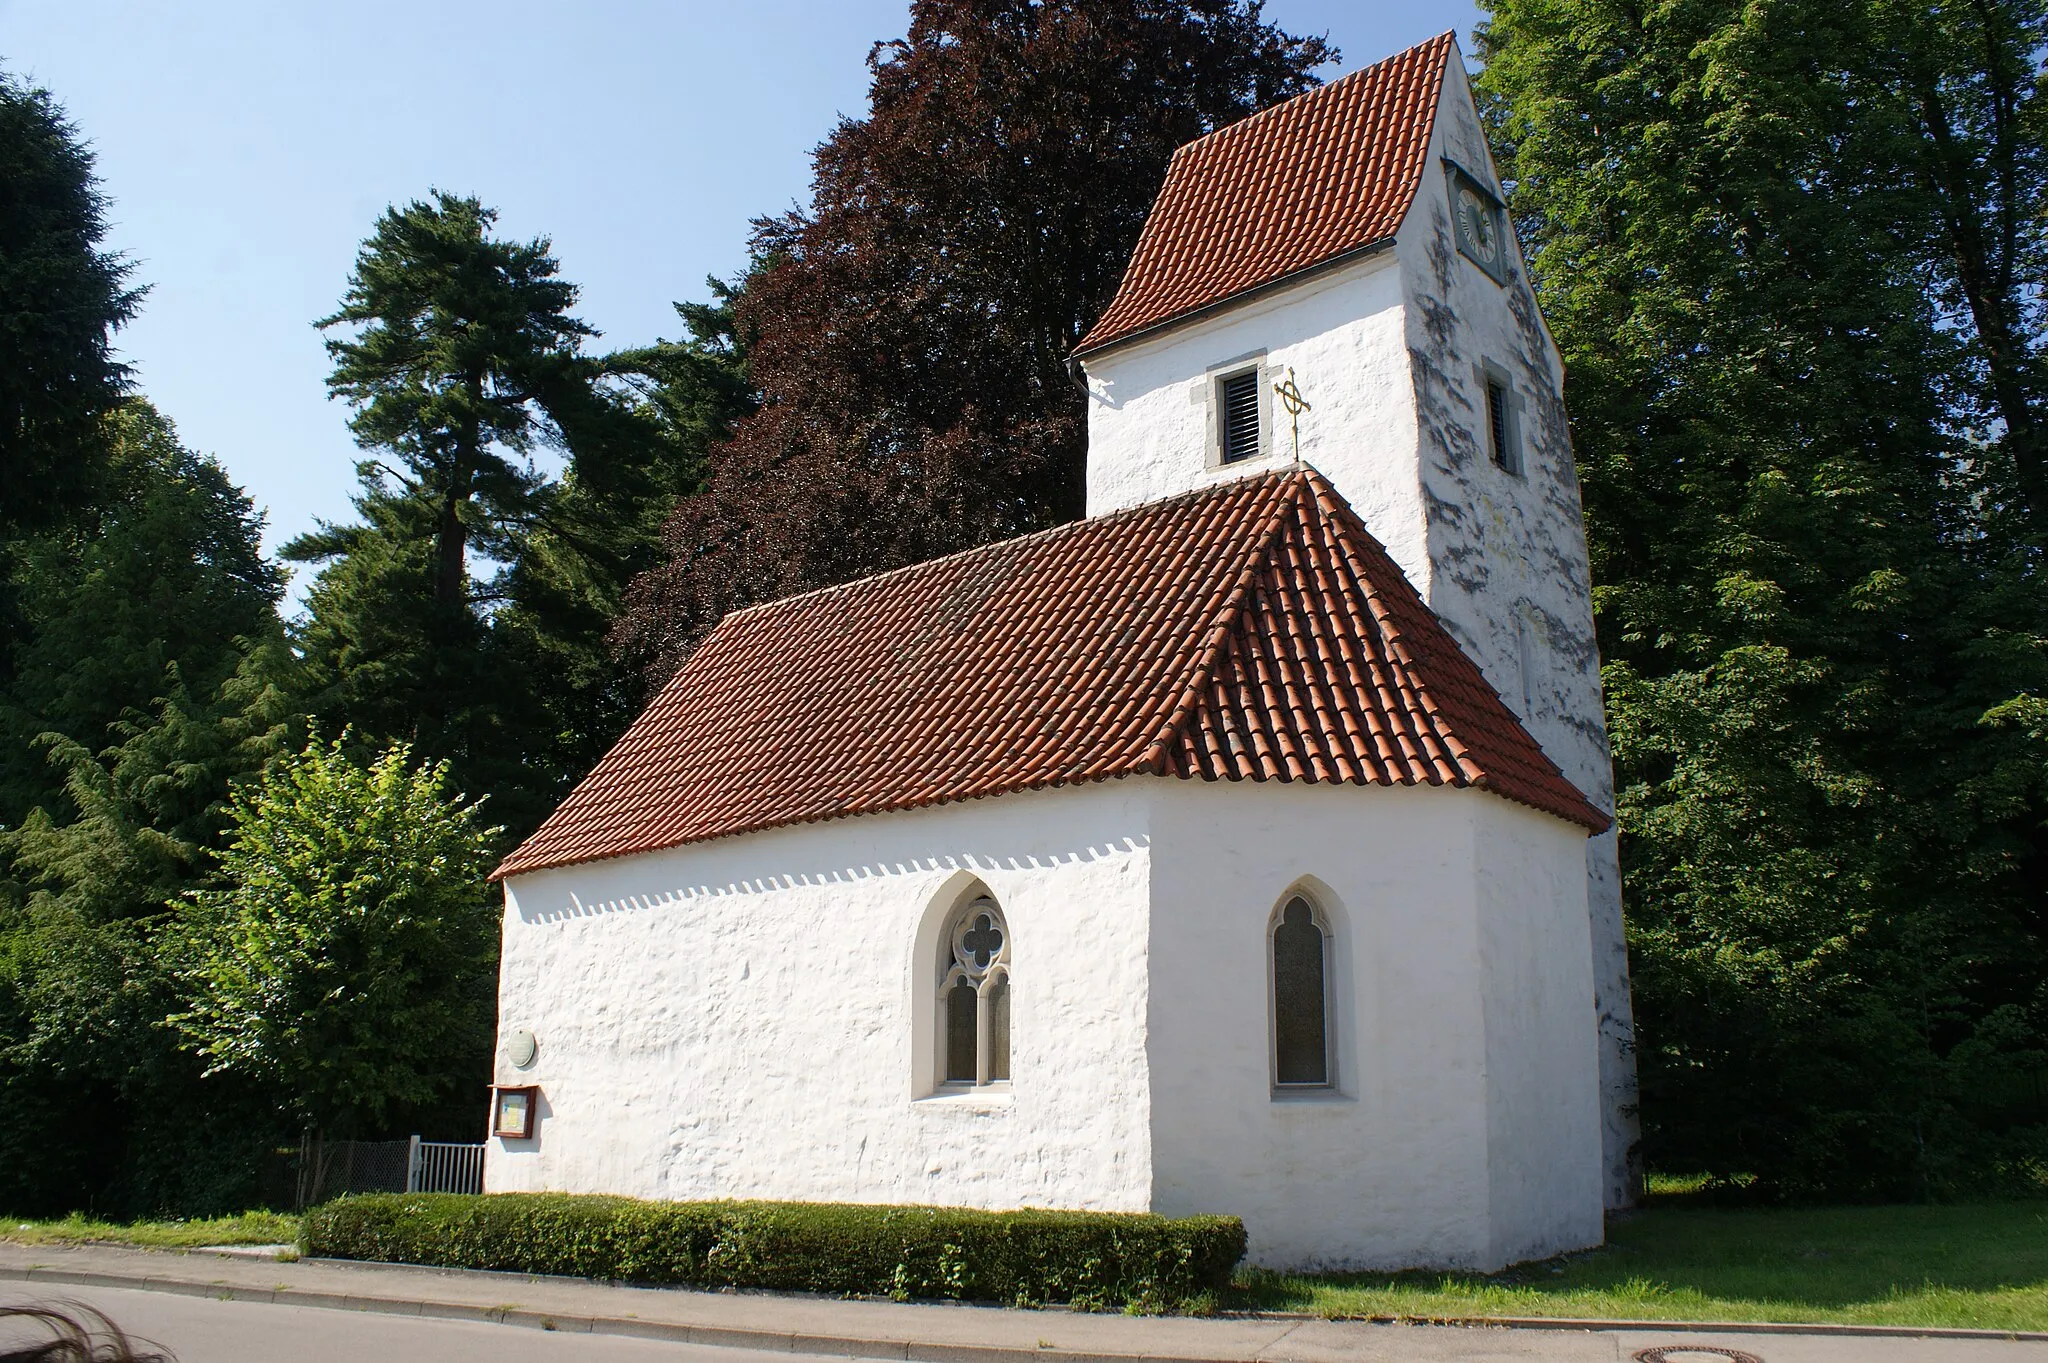 Photo showing: Evangelical Lutheran Chapel St. Wolfgang, Rickenbacher Strasse 109 in Lindau on Lake Constance (Germany). Comes from the 9th century.